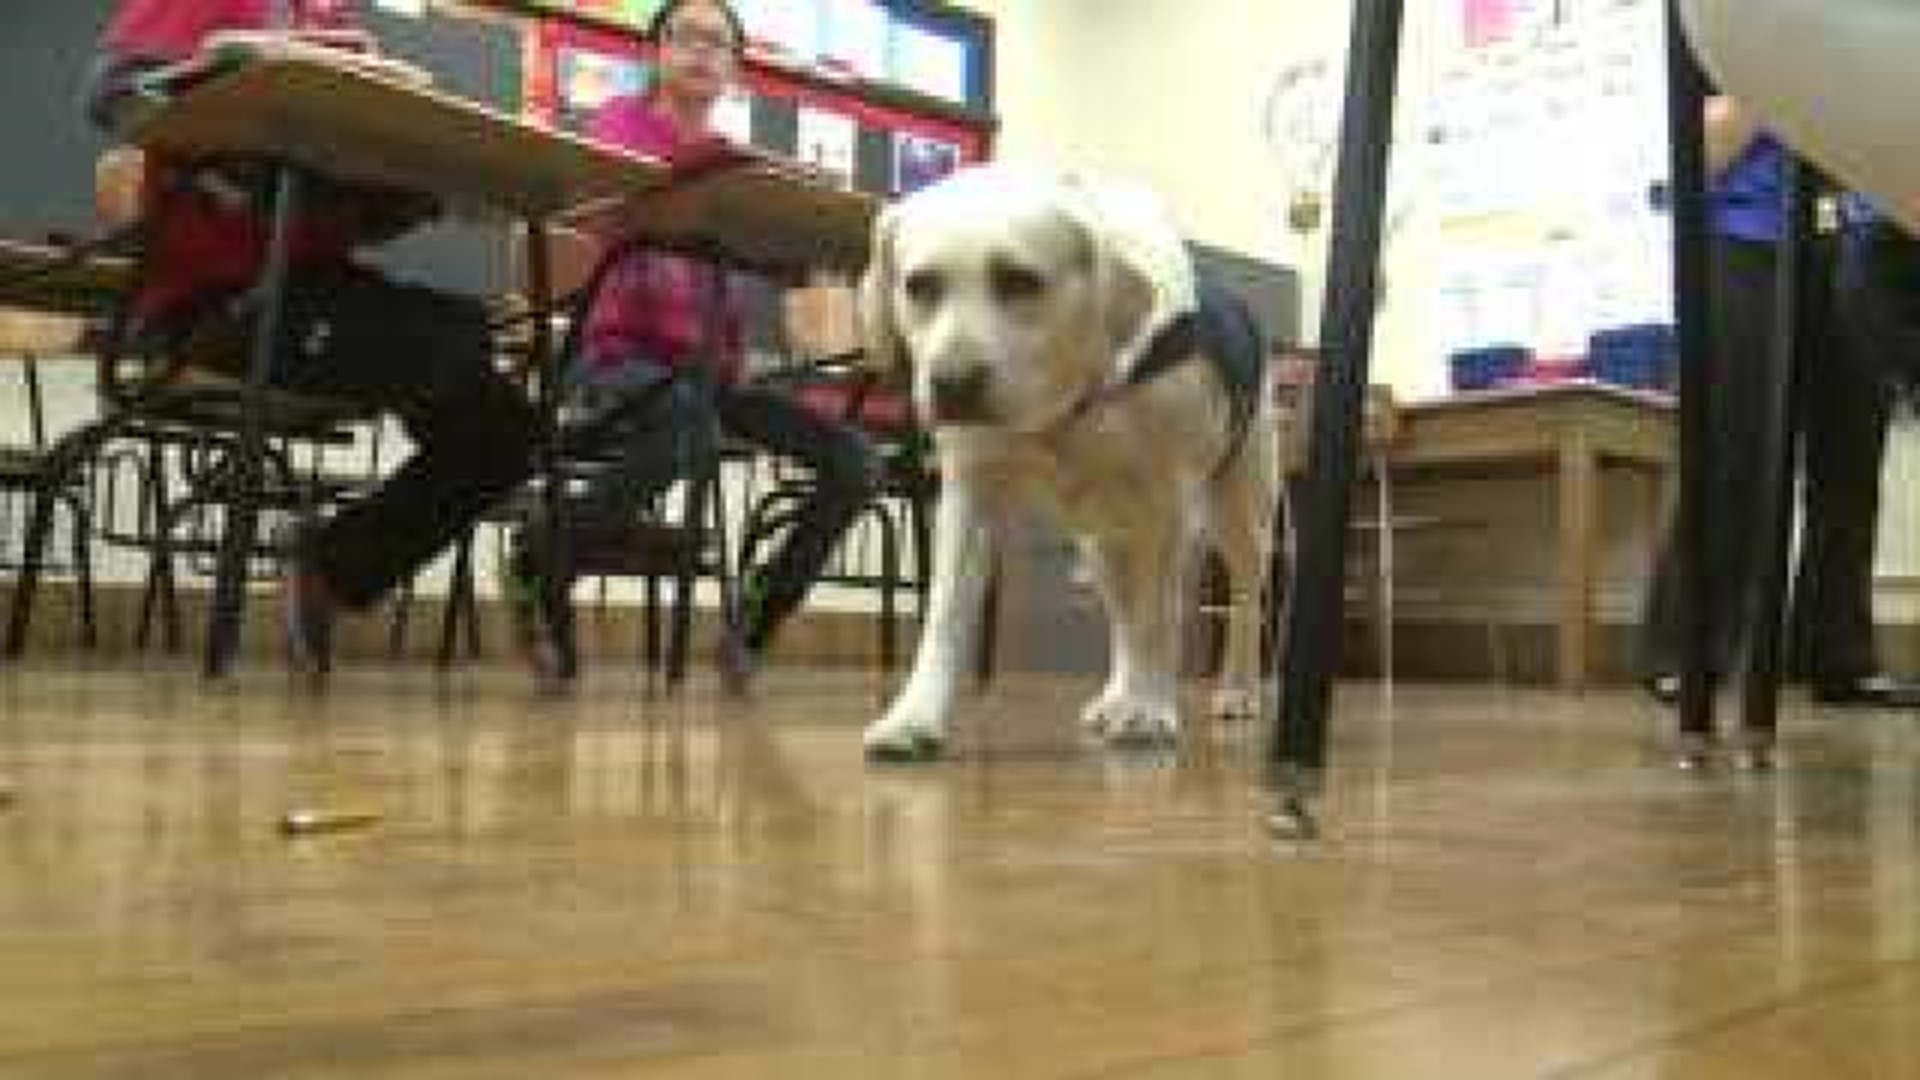 Smart Intermediate students get a new friend in Cami the facility dog